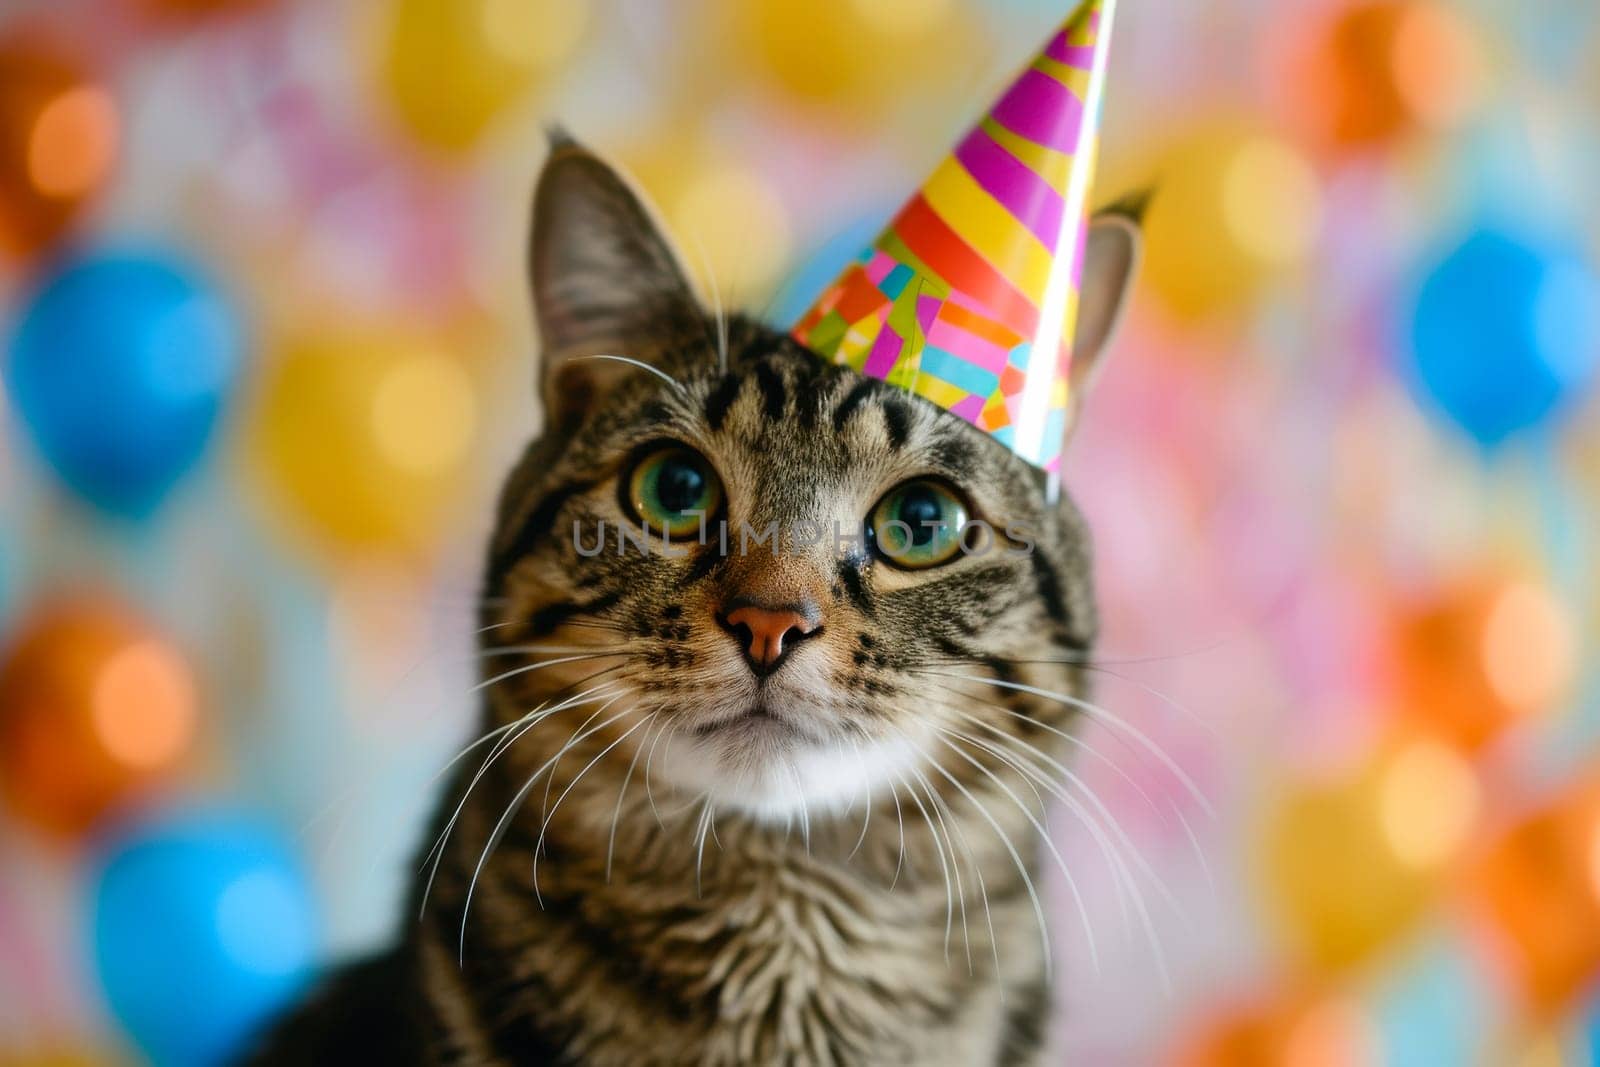 This photo features a cat wearing a festive party hat against a bright background.